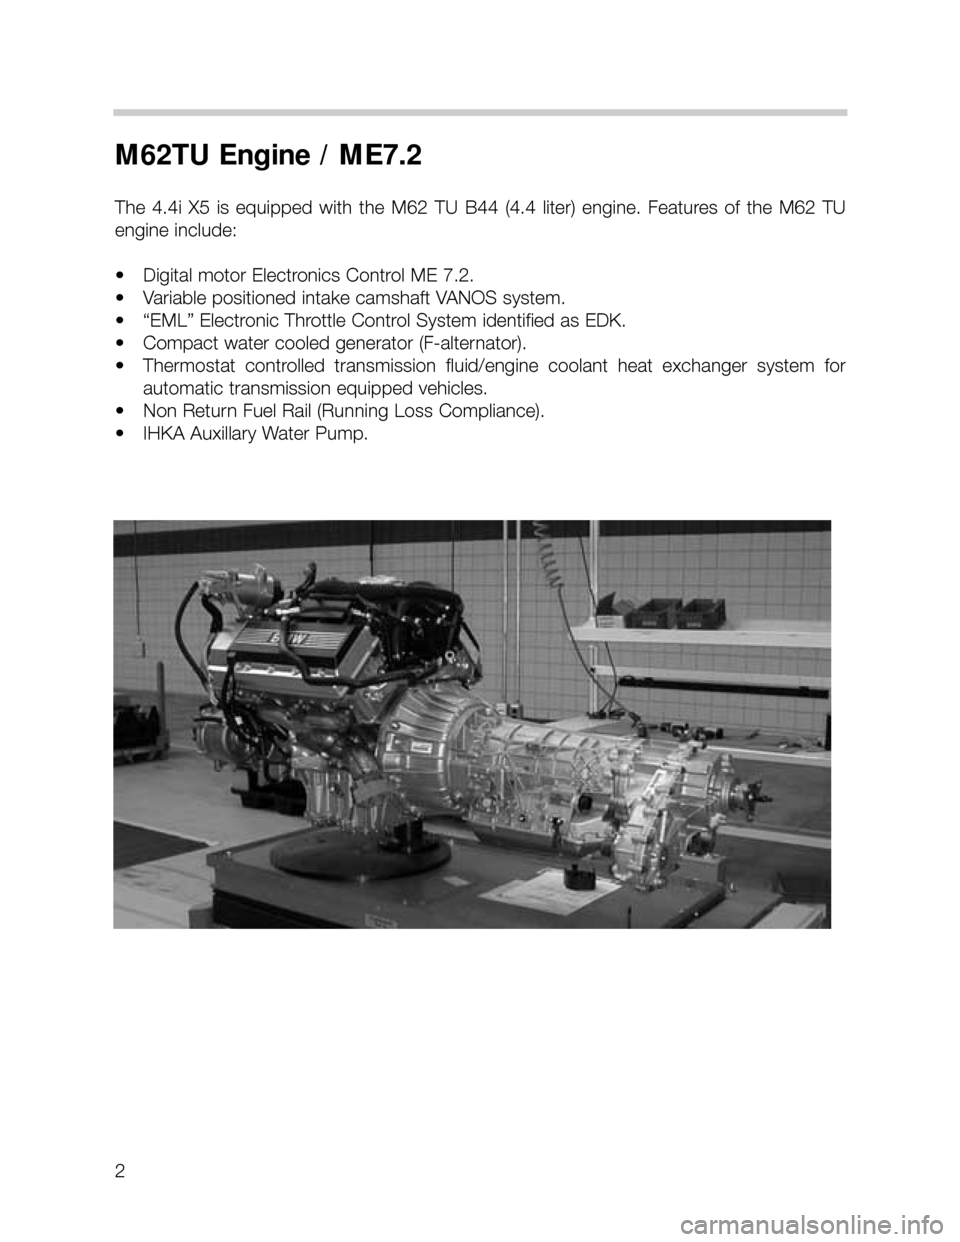 BMW X5 2002 E53 M62TU Engine Workshop Manual 2
M62TU Engine / ME7.2
The 4.4i X5 is equipped  with  the  M62  TU  B44  (4.4  liter)  engine.  Features  of  the  M62  TU
engine include:
• Digital motor Electronics Control ME 7.2.
• Variable po